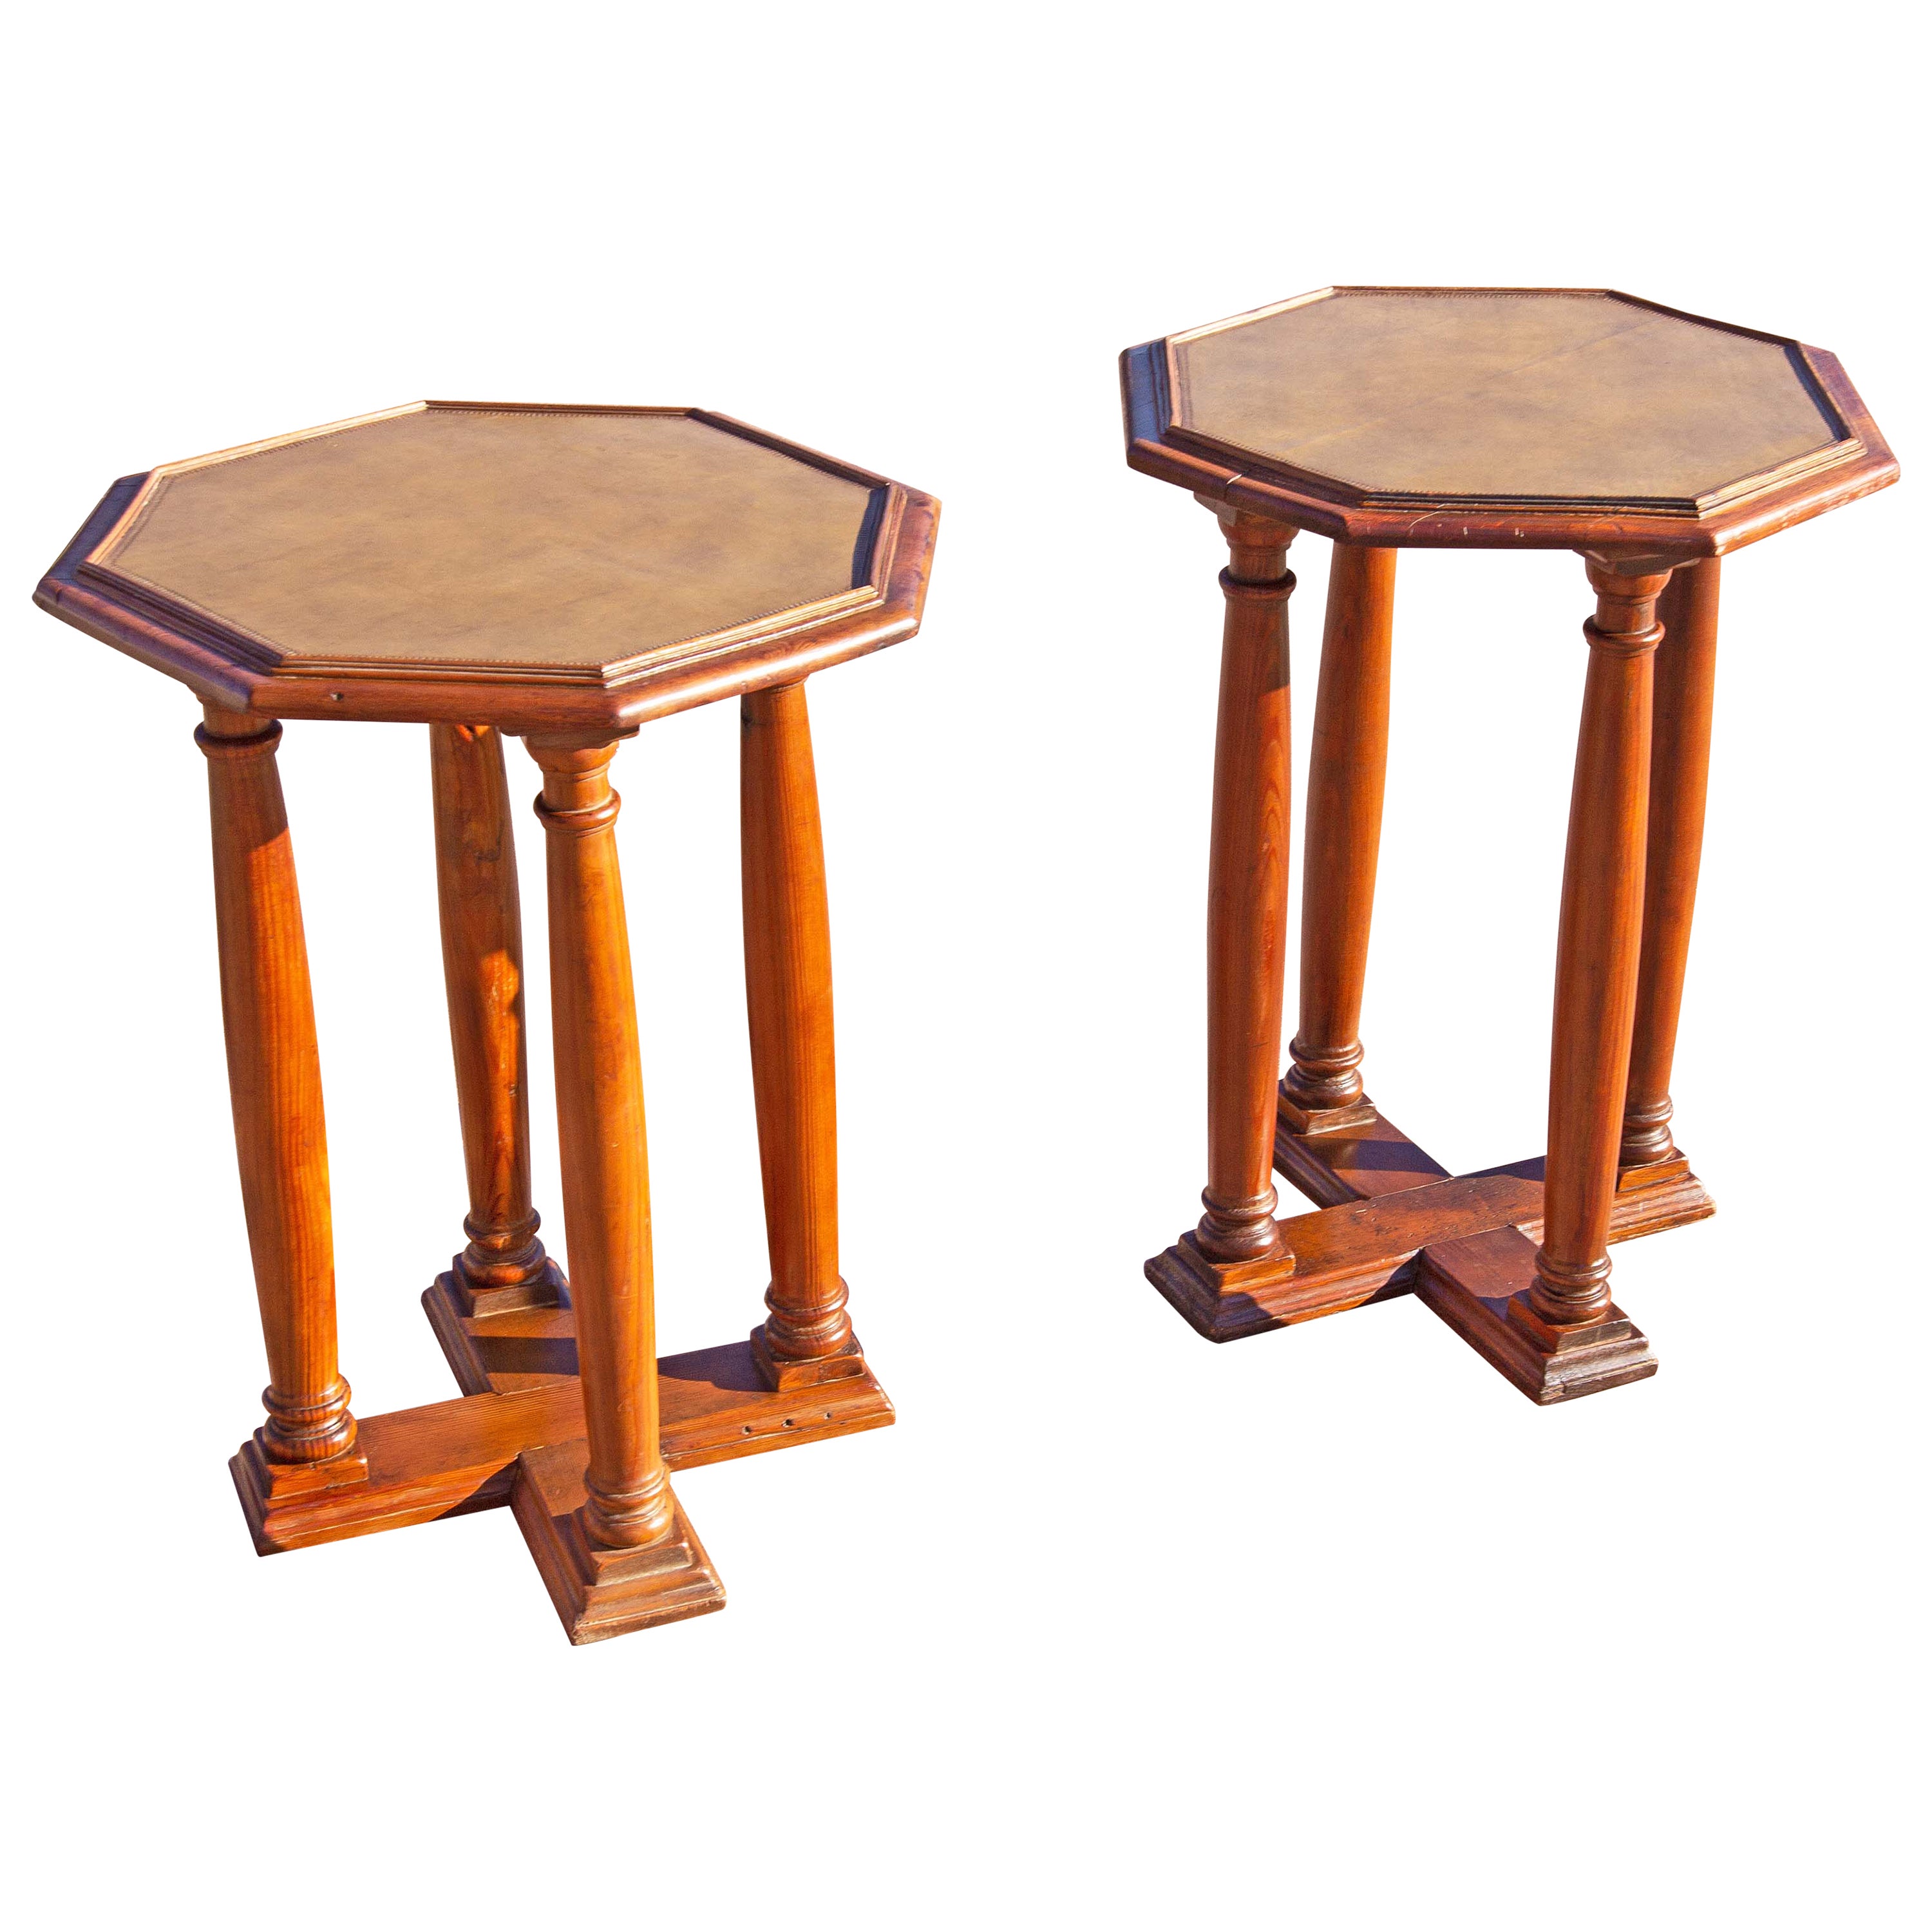 Pair of Leather Top Italian Tuscan Tables 19th Century For Sale